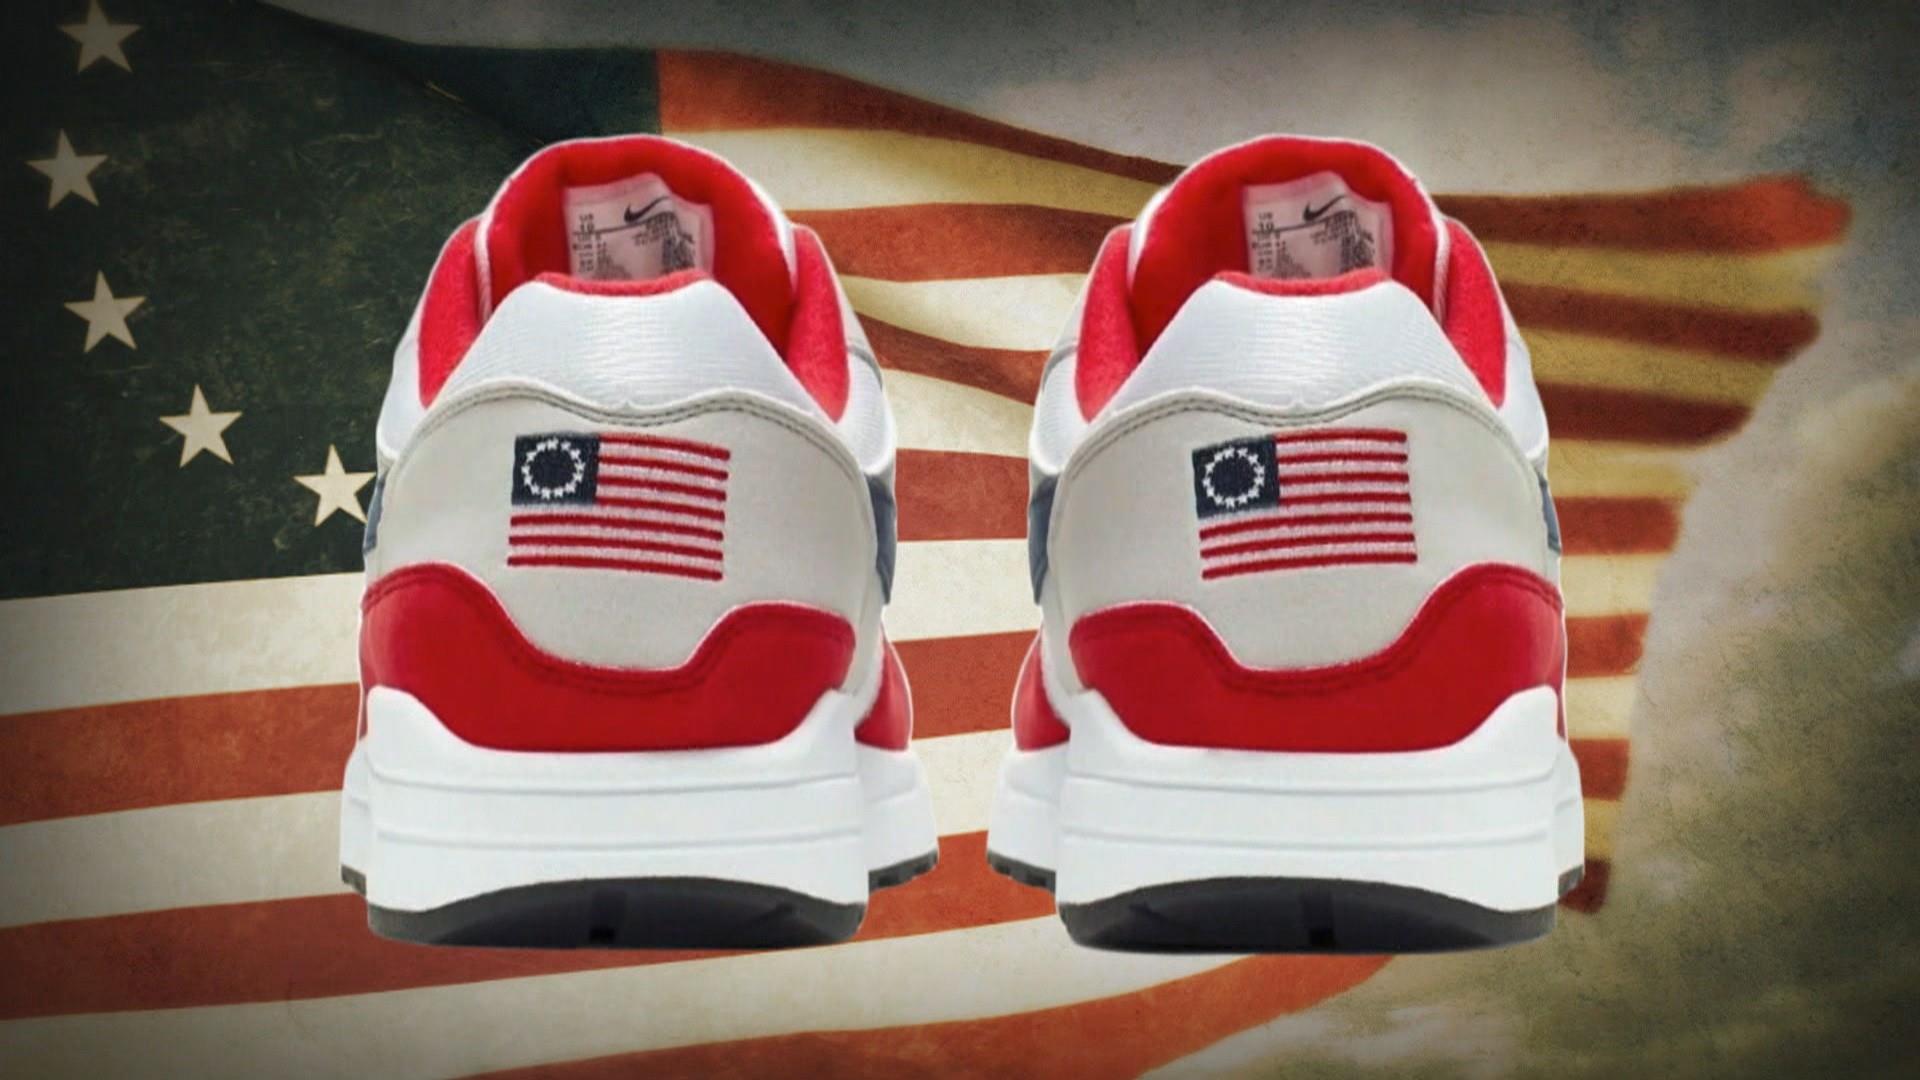 medianoche carbón vacío Nike pulls Betsy Ross flag sneakers after backlash